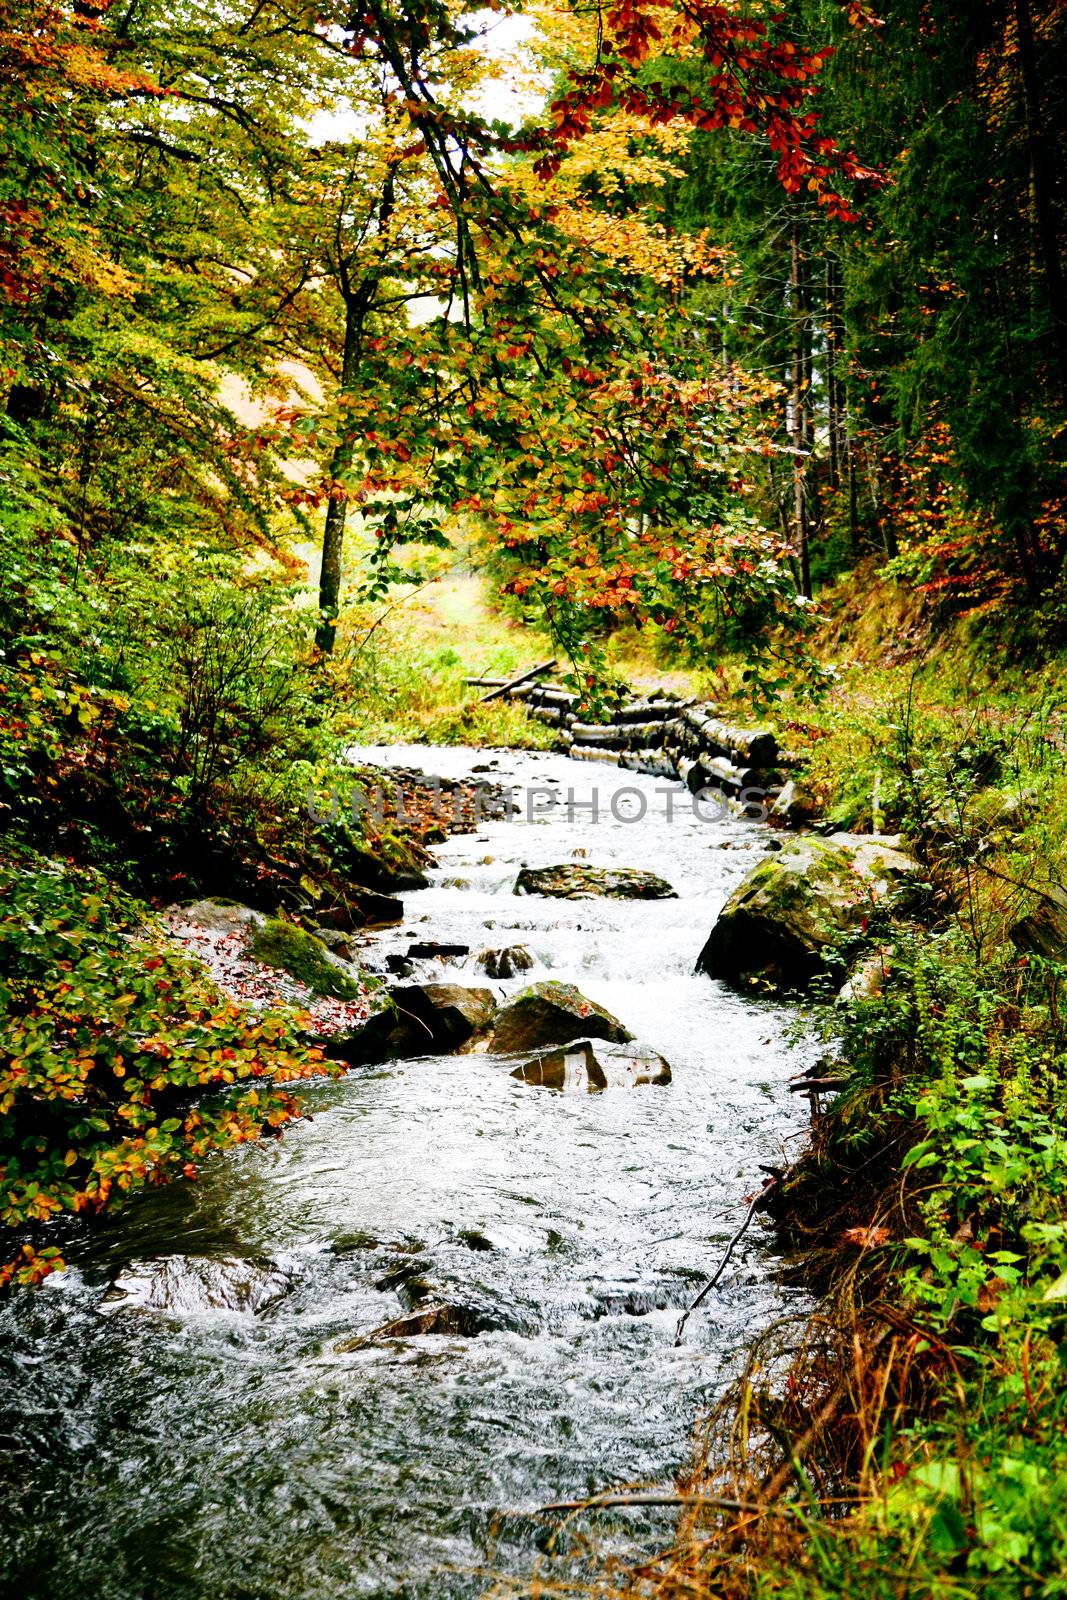 An image of river in autumn forest